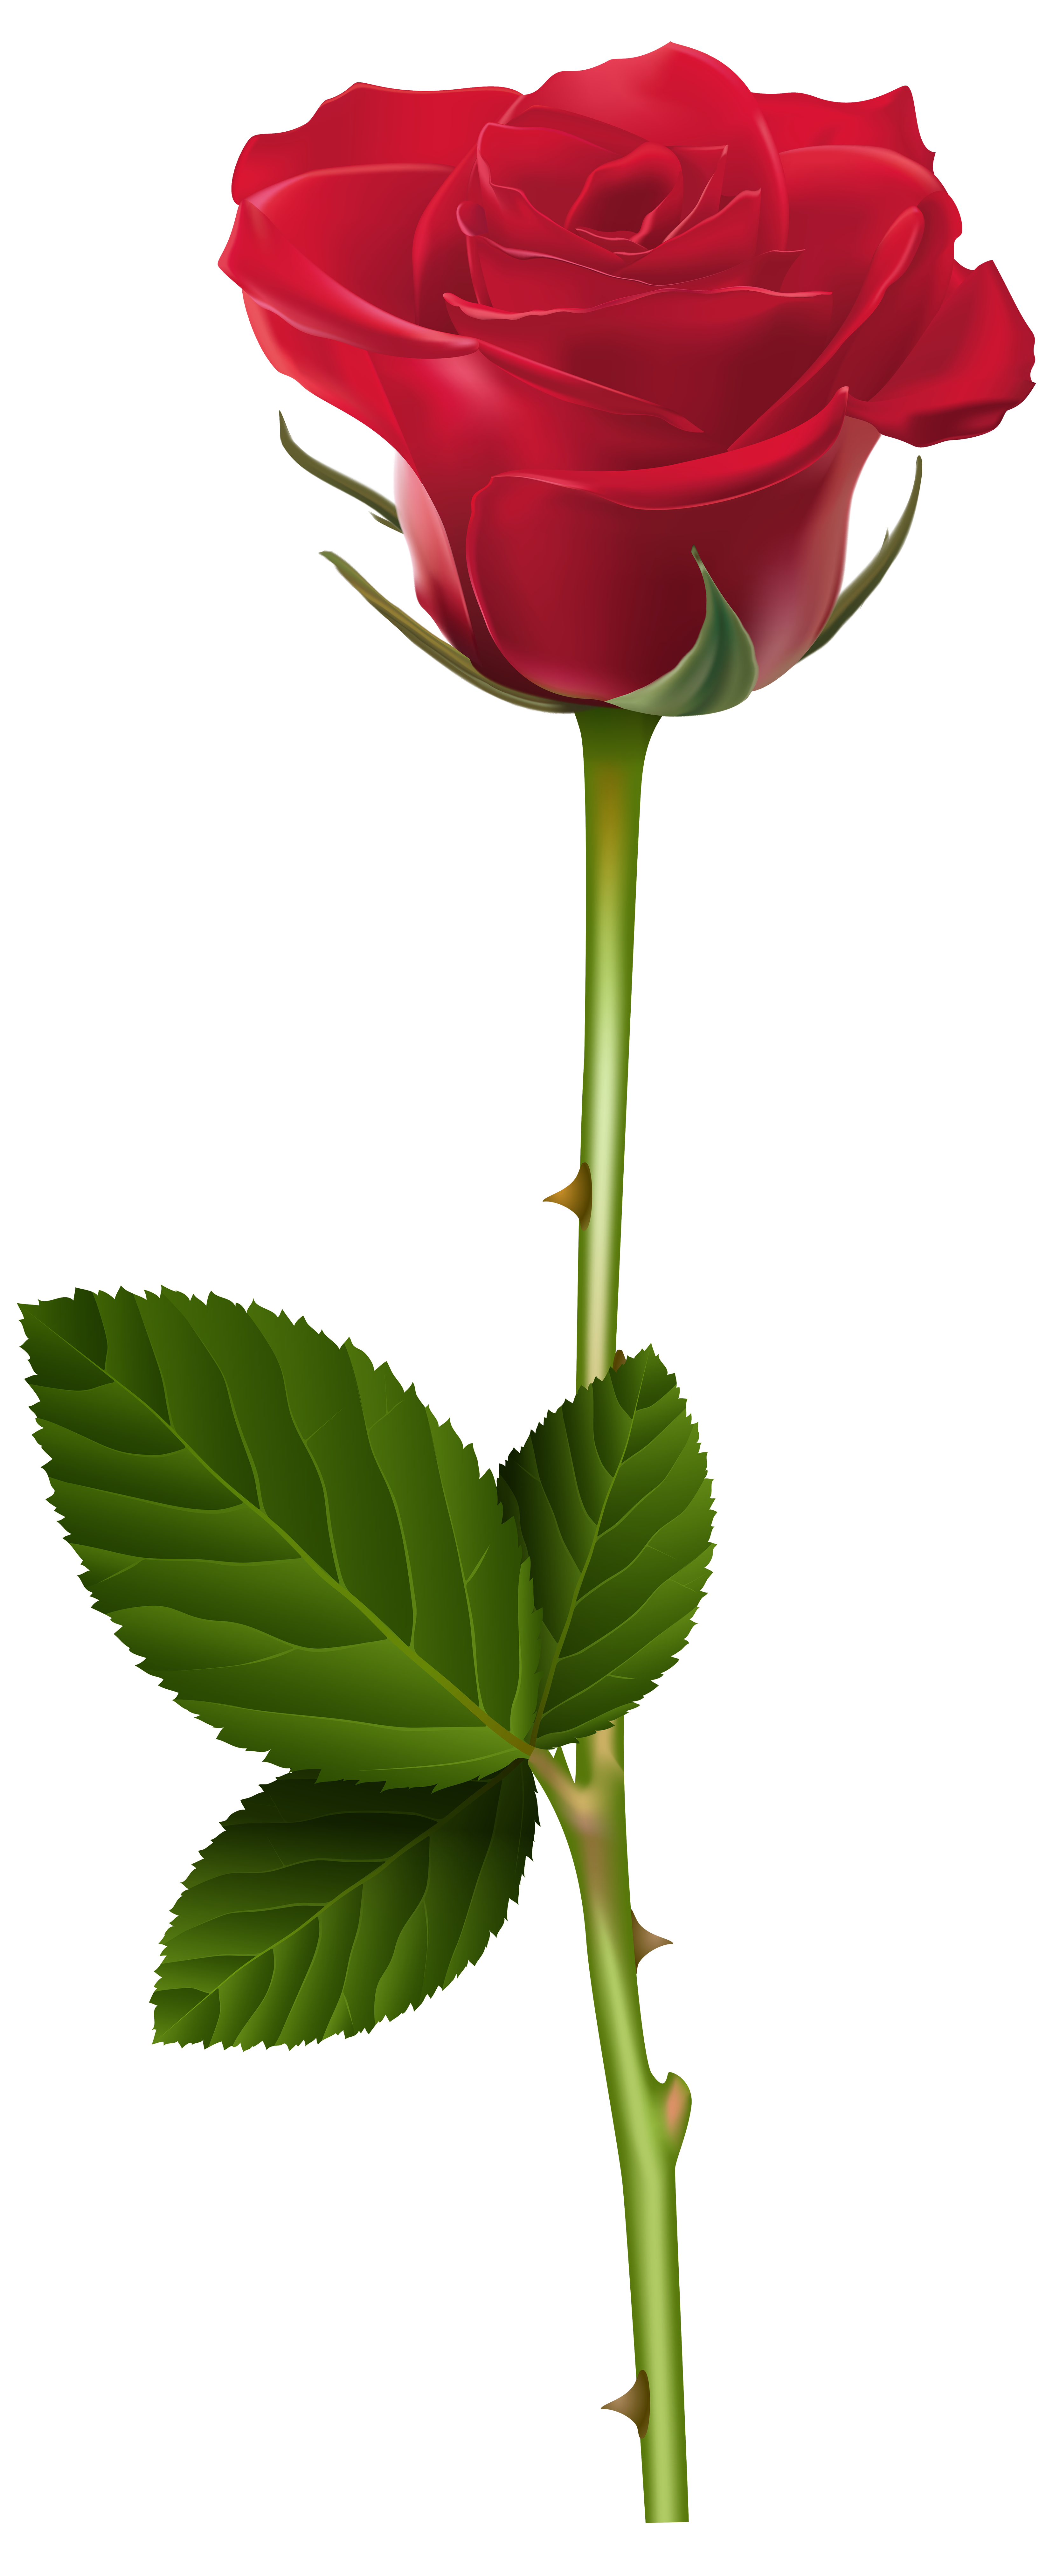 Fern clipart wheat plant. Red rose png transparent